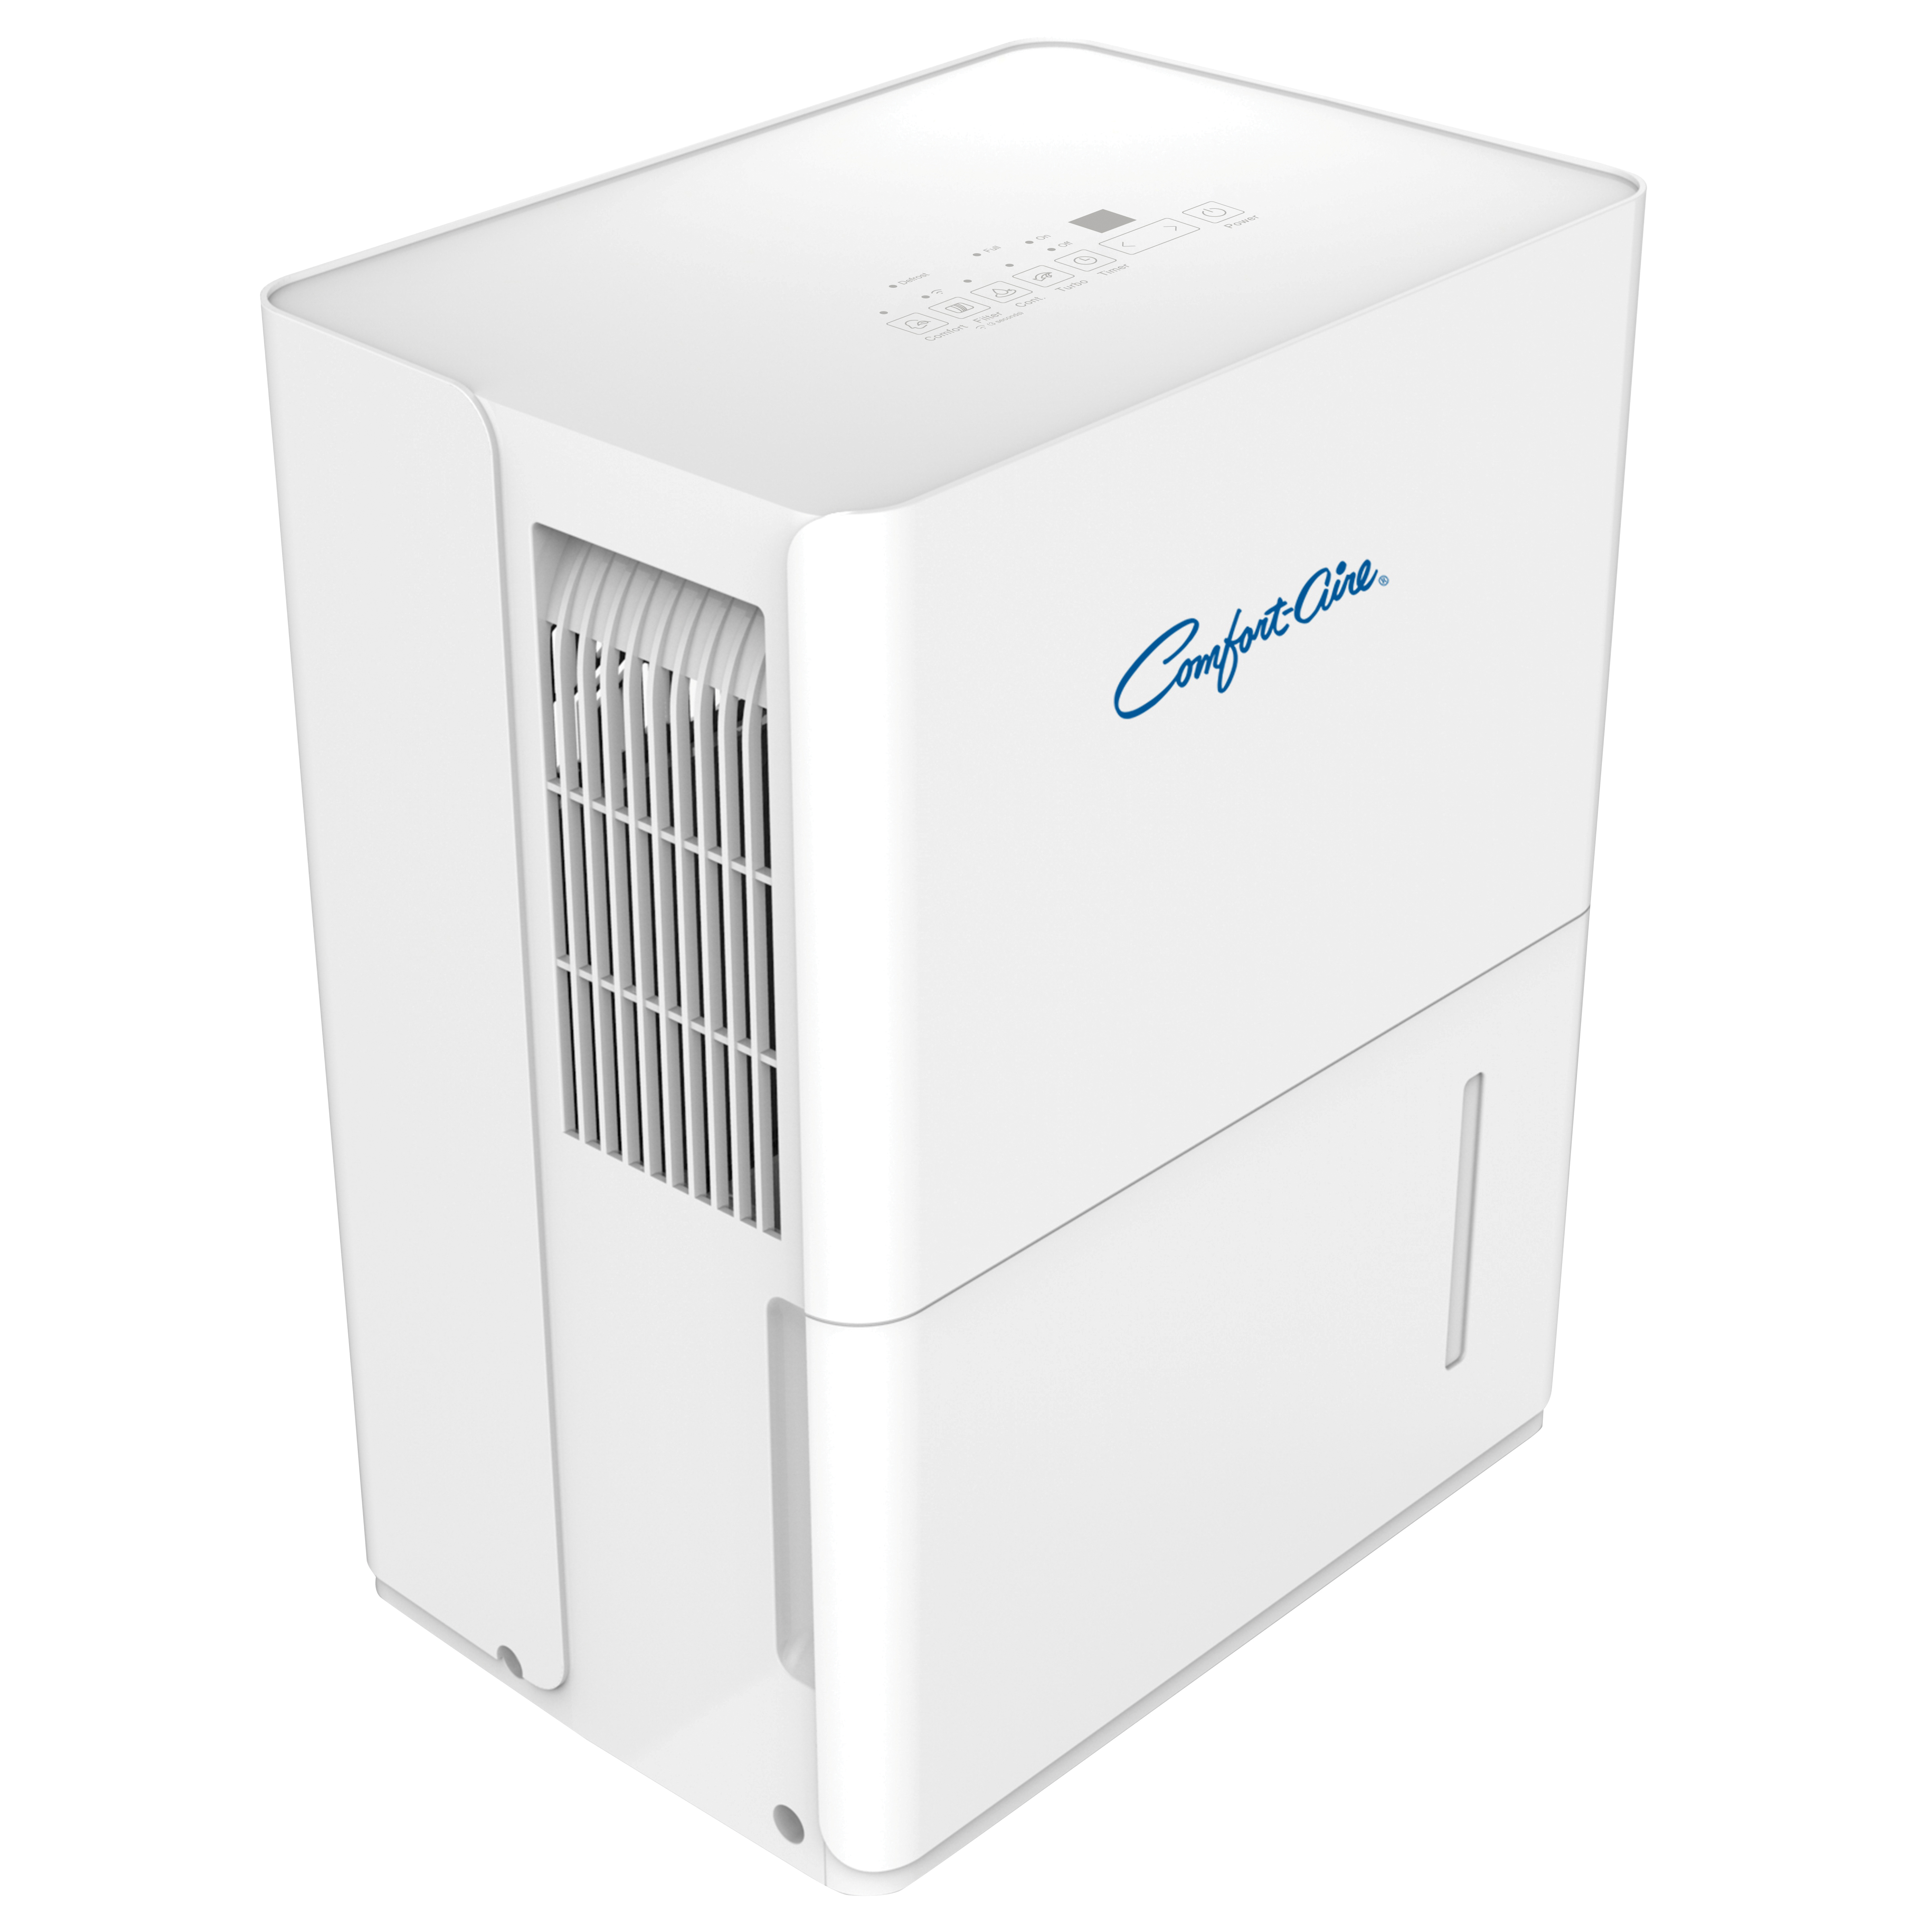 BHD-35A Dehumidifier, 3.25 A, 115 V, 360 W, 2-Speed, 35 pts/day Humidity Removal, 12.68 pt Tank